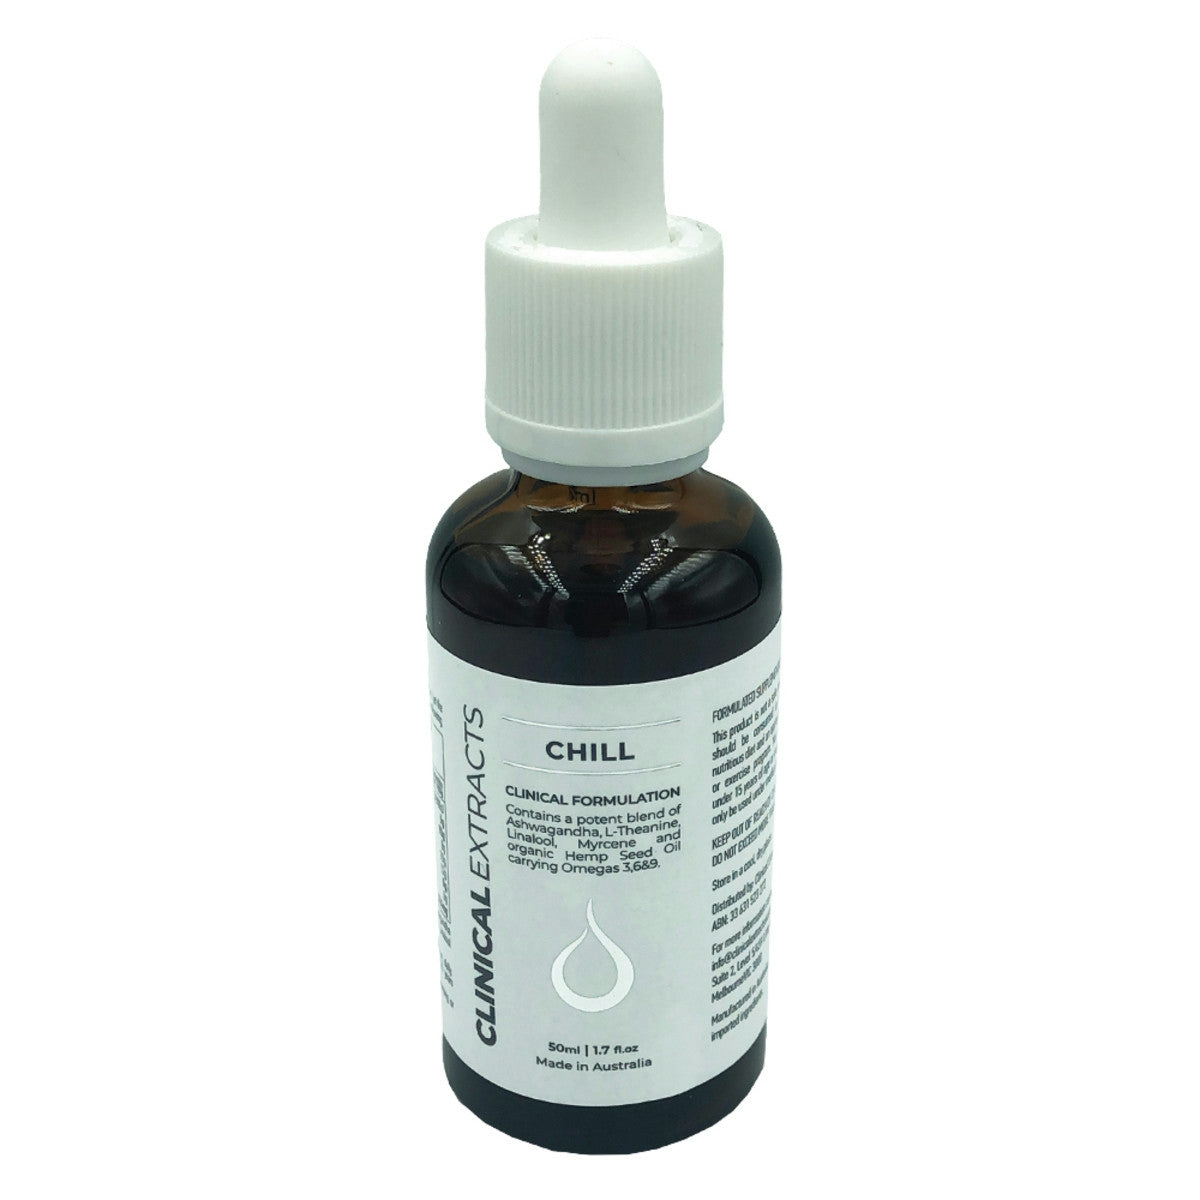 image of Clinical Extracts Clinical Formulation Chill 50ml with a white background